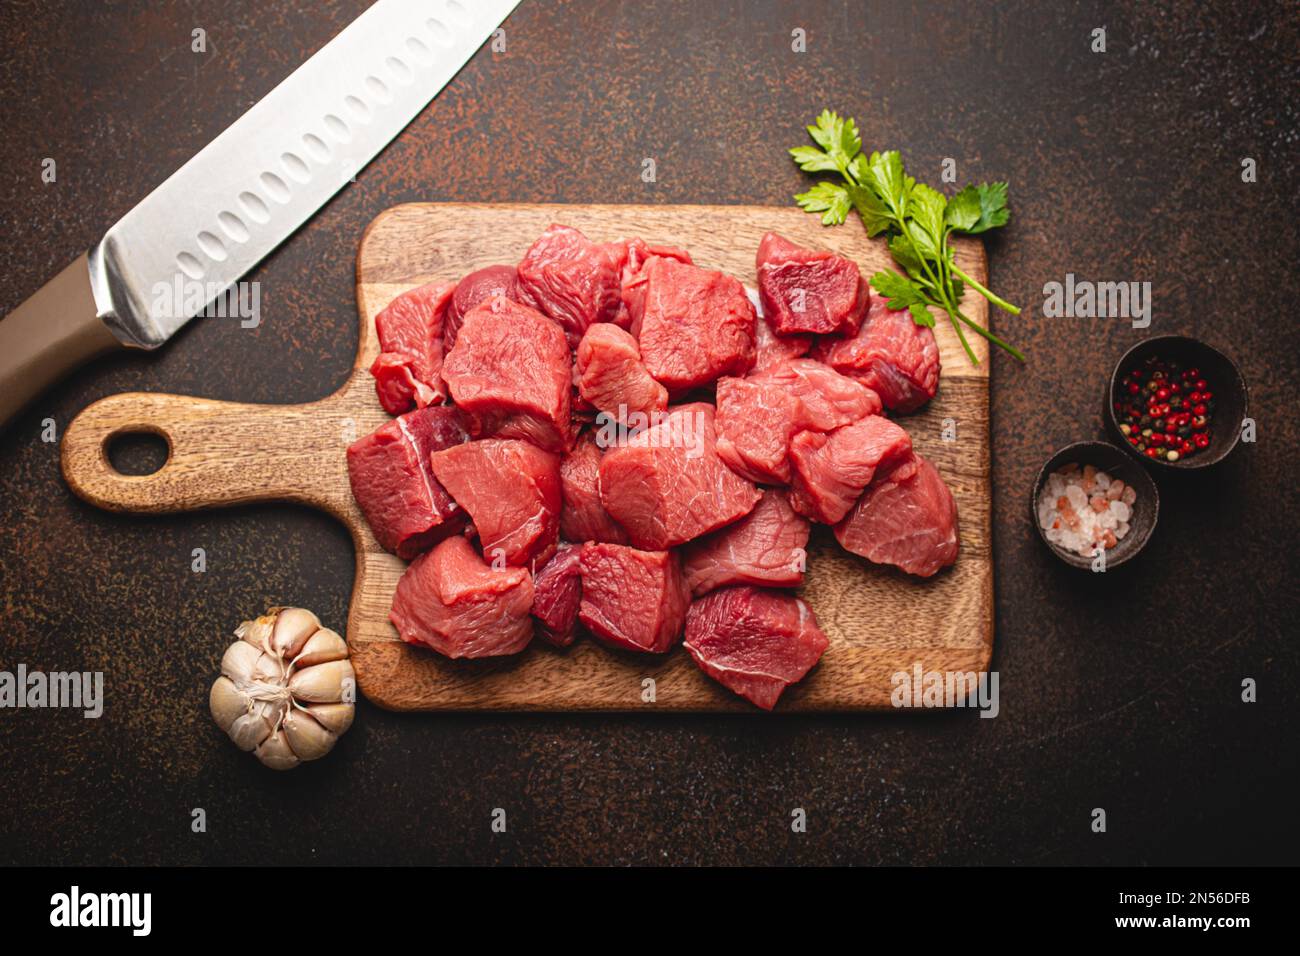 https://c8.alamy.com/comp/2N56DFB/raw-beef-meat-chopped-in-cubes-with-bunch-of-fresh-parsley-garlic-salt-and-pepper-on-wooden-cutting-board-with-knife-for-cooking-stew-or-meat-dish-2N56DFB.jpg